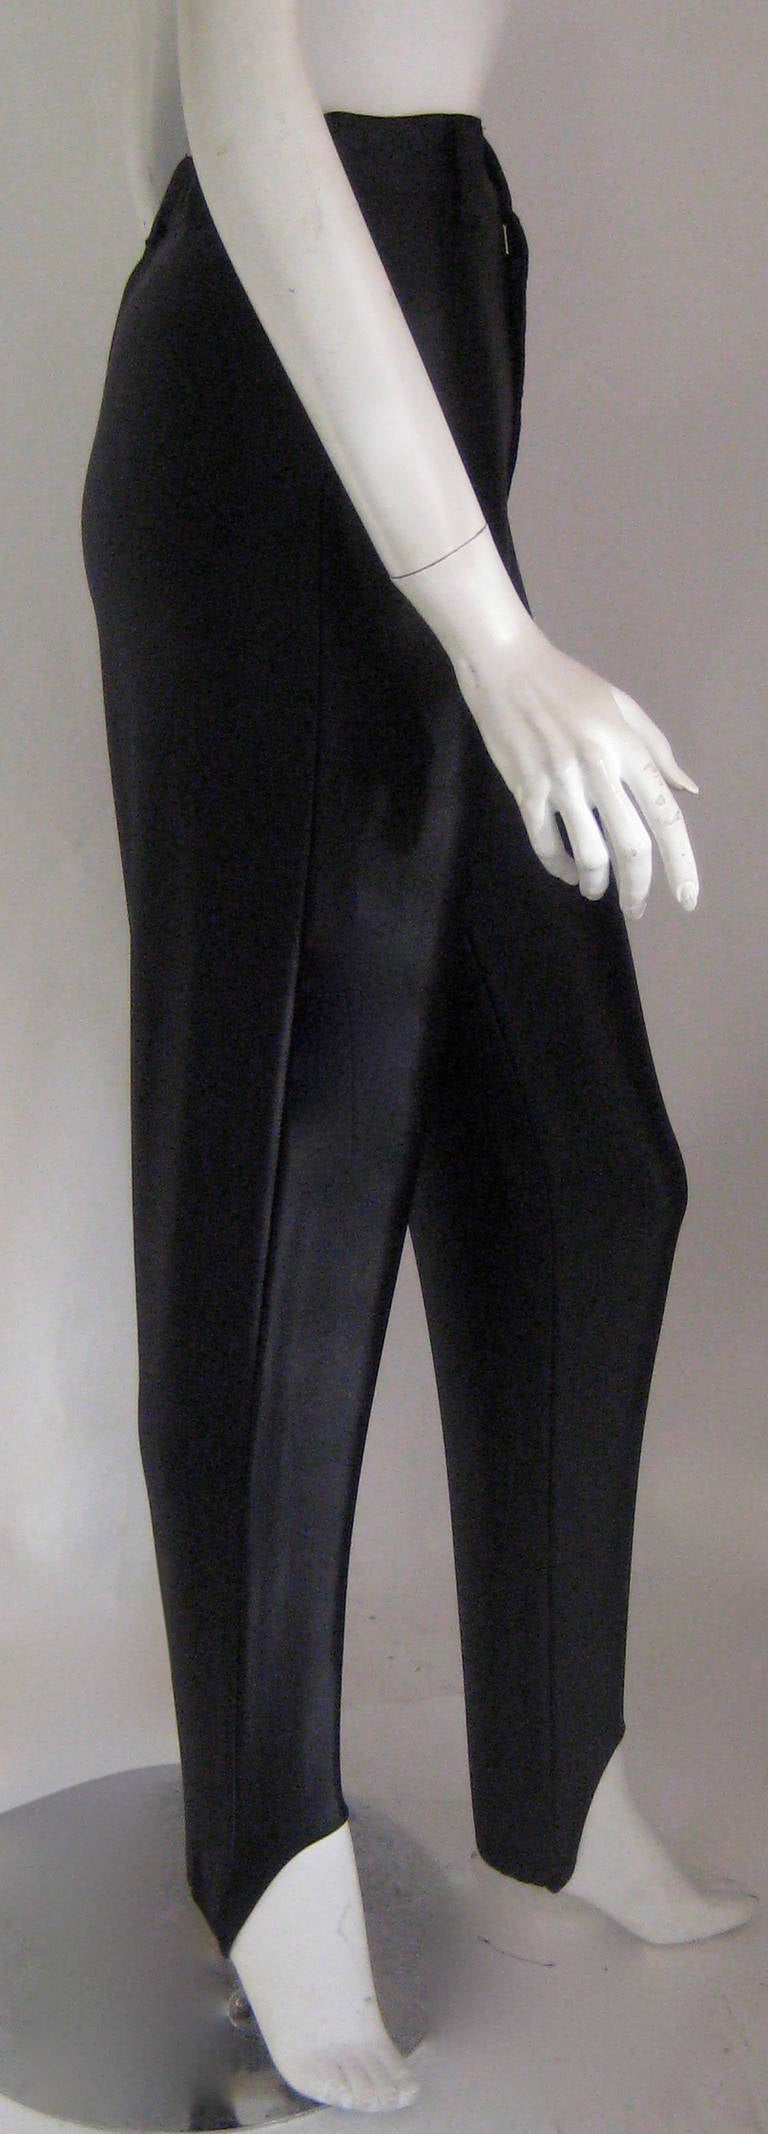 From the Ebony Fashion Fair Runway Archive Collection
High waisted pants
Snap waistband
These can hook over the heel or be worn scrunched up
Fabric is a combination of nylon and polyurethane